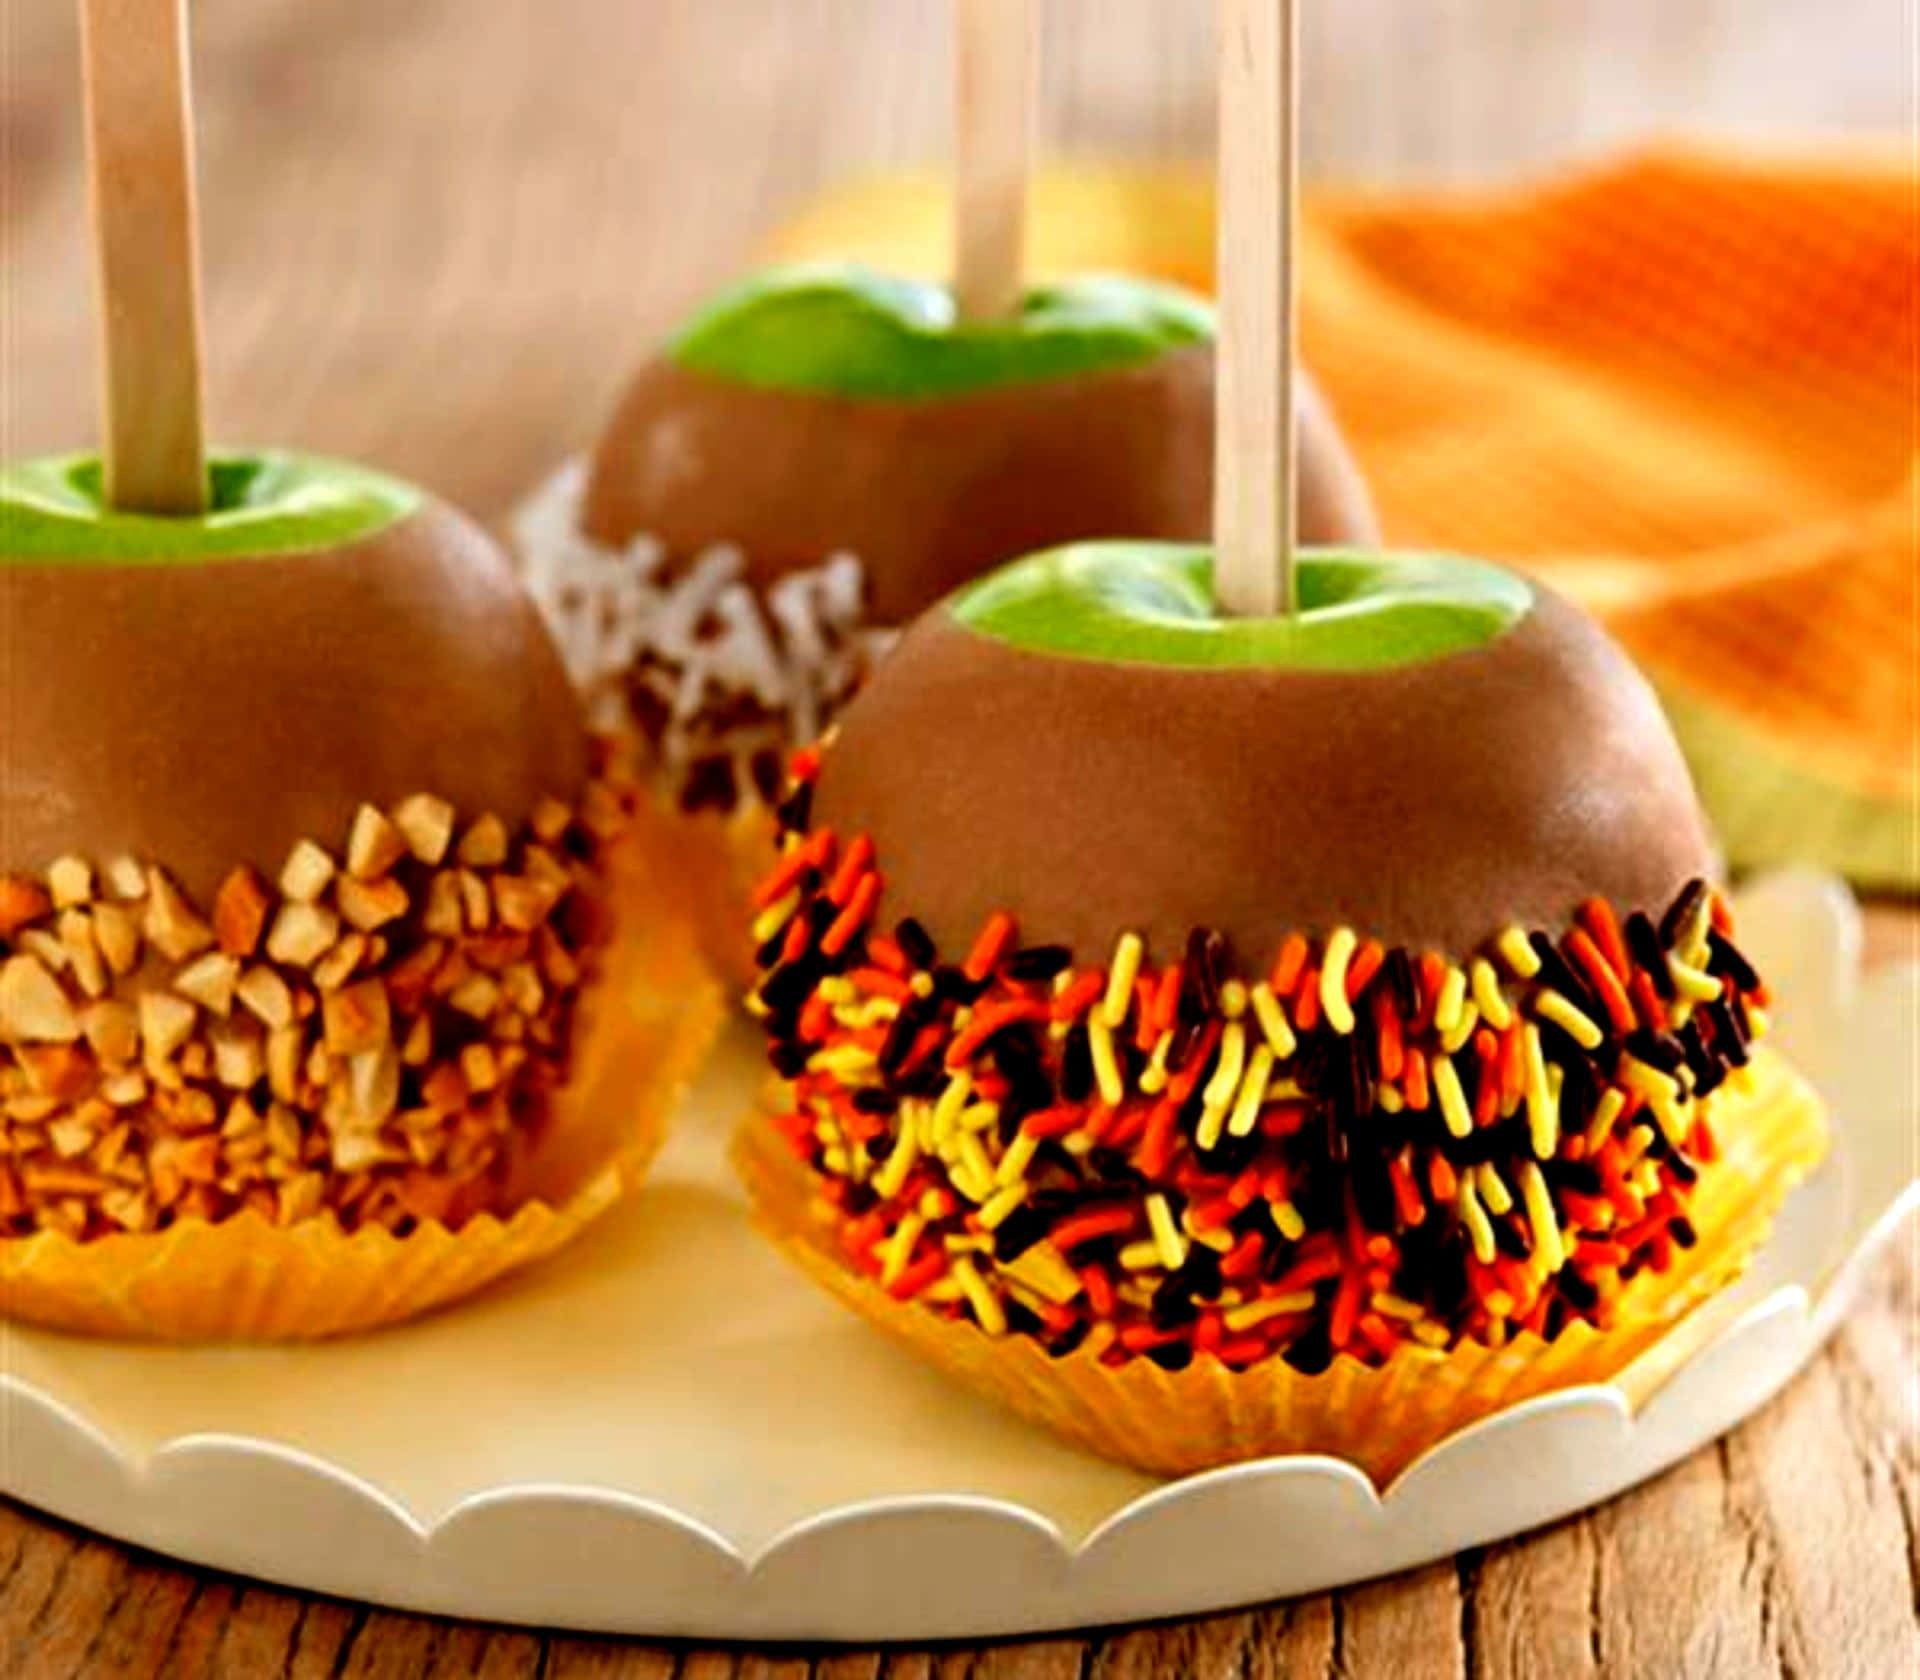 Delectable Caramel Apples with Chopped Nuts Wallpaper